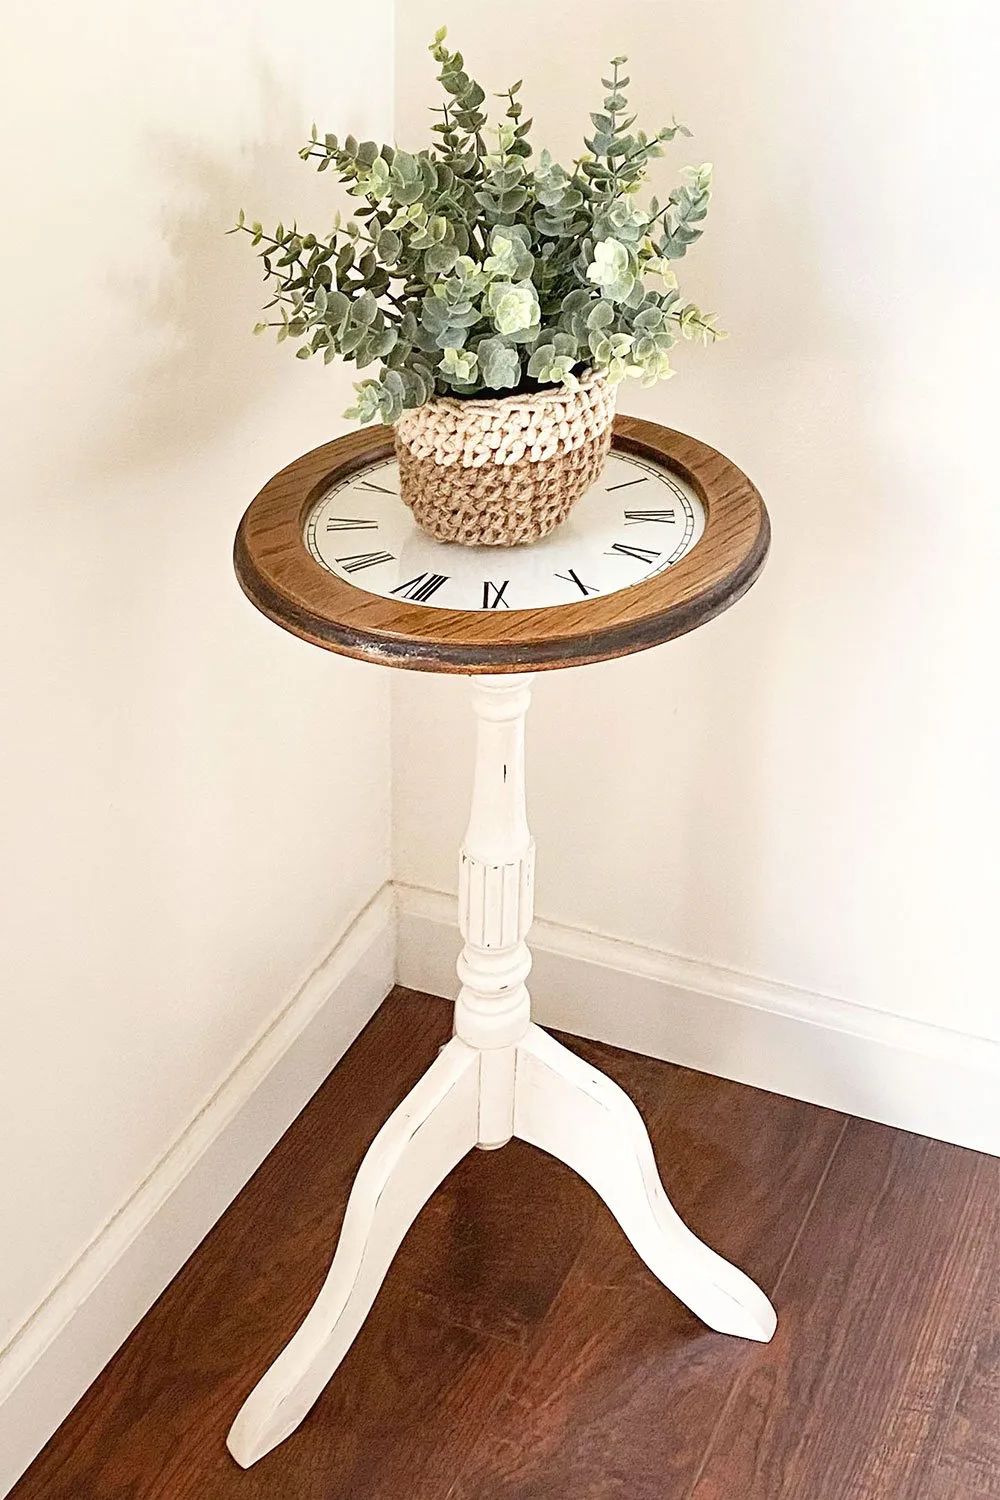 Refinished Wood Plant Stand With A Diy Vinyl Clock Tabletop – Inside Favorite Painted Wood Plant Stands (View 2 of 15)